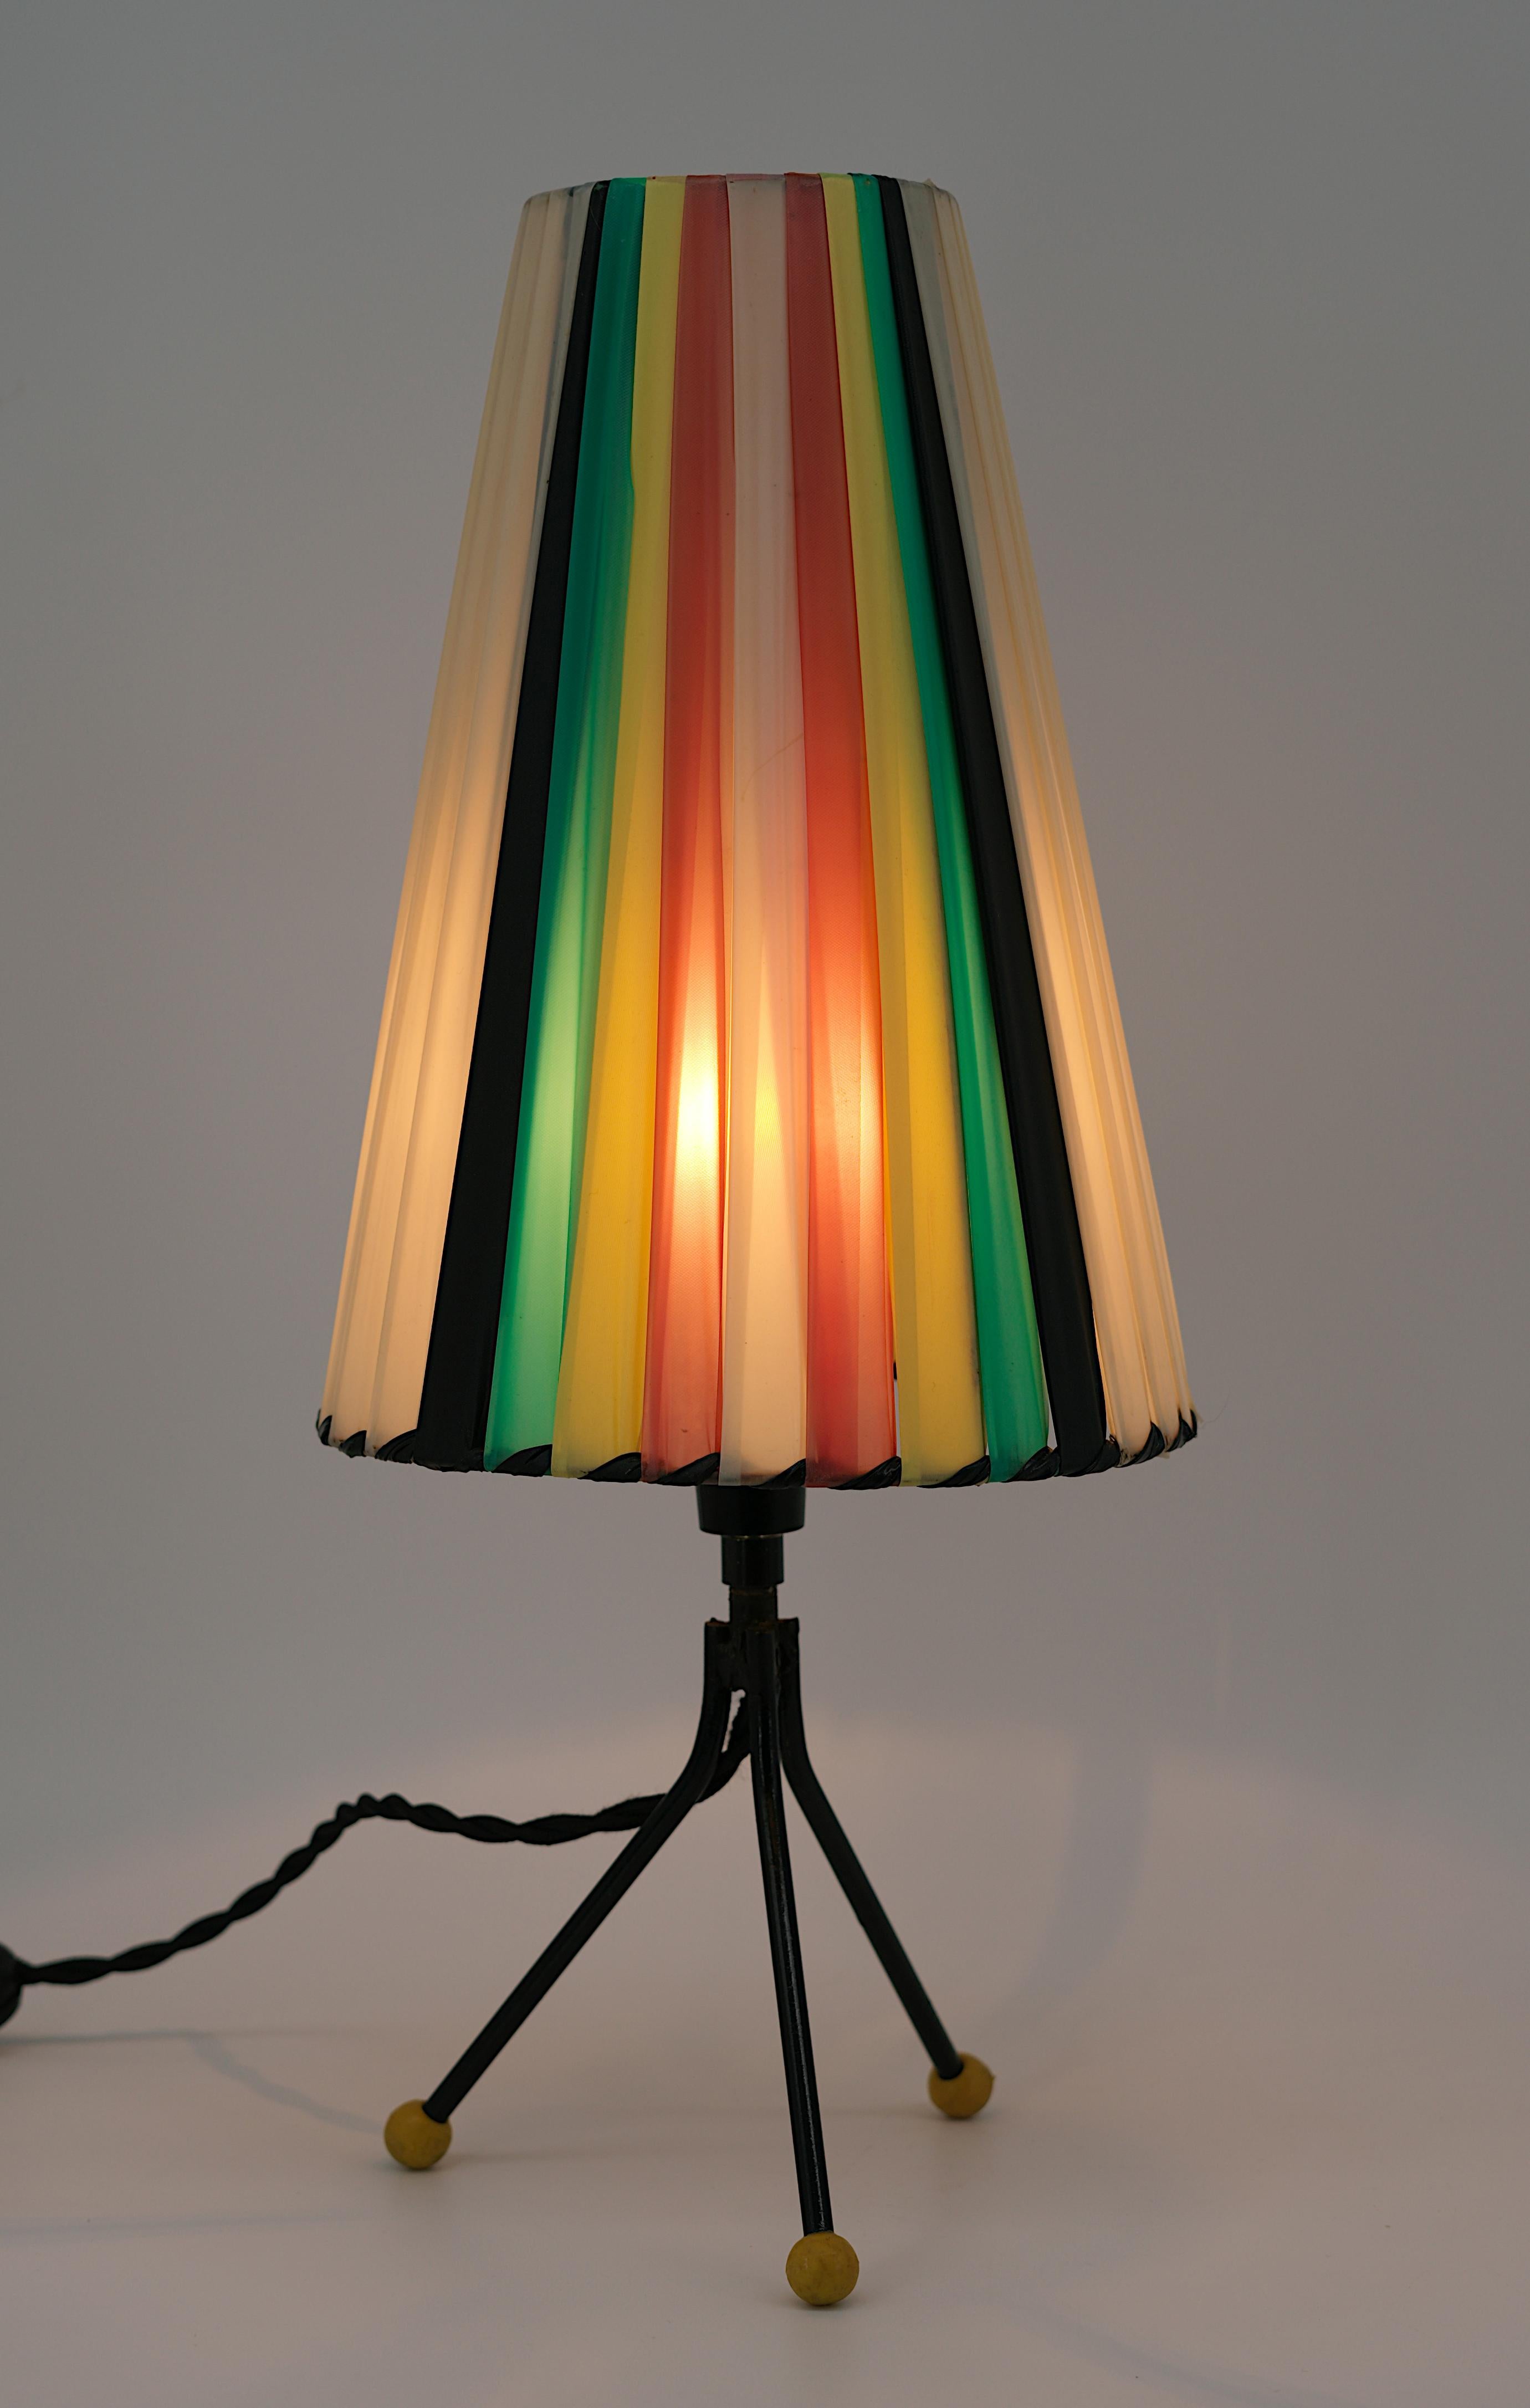 Midcentury table lamp, France, 1950s. Table lamp featuring a synthetic fabric slatted shade on a metal tripod base with rubber balls. Height : 41cm -  13.2 inches, Diameter : 18cm - 7.1 inches. Some slight traces of age on the lampshade. Delivered